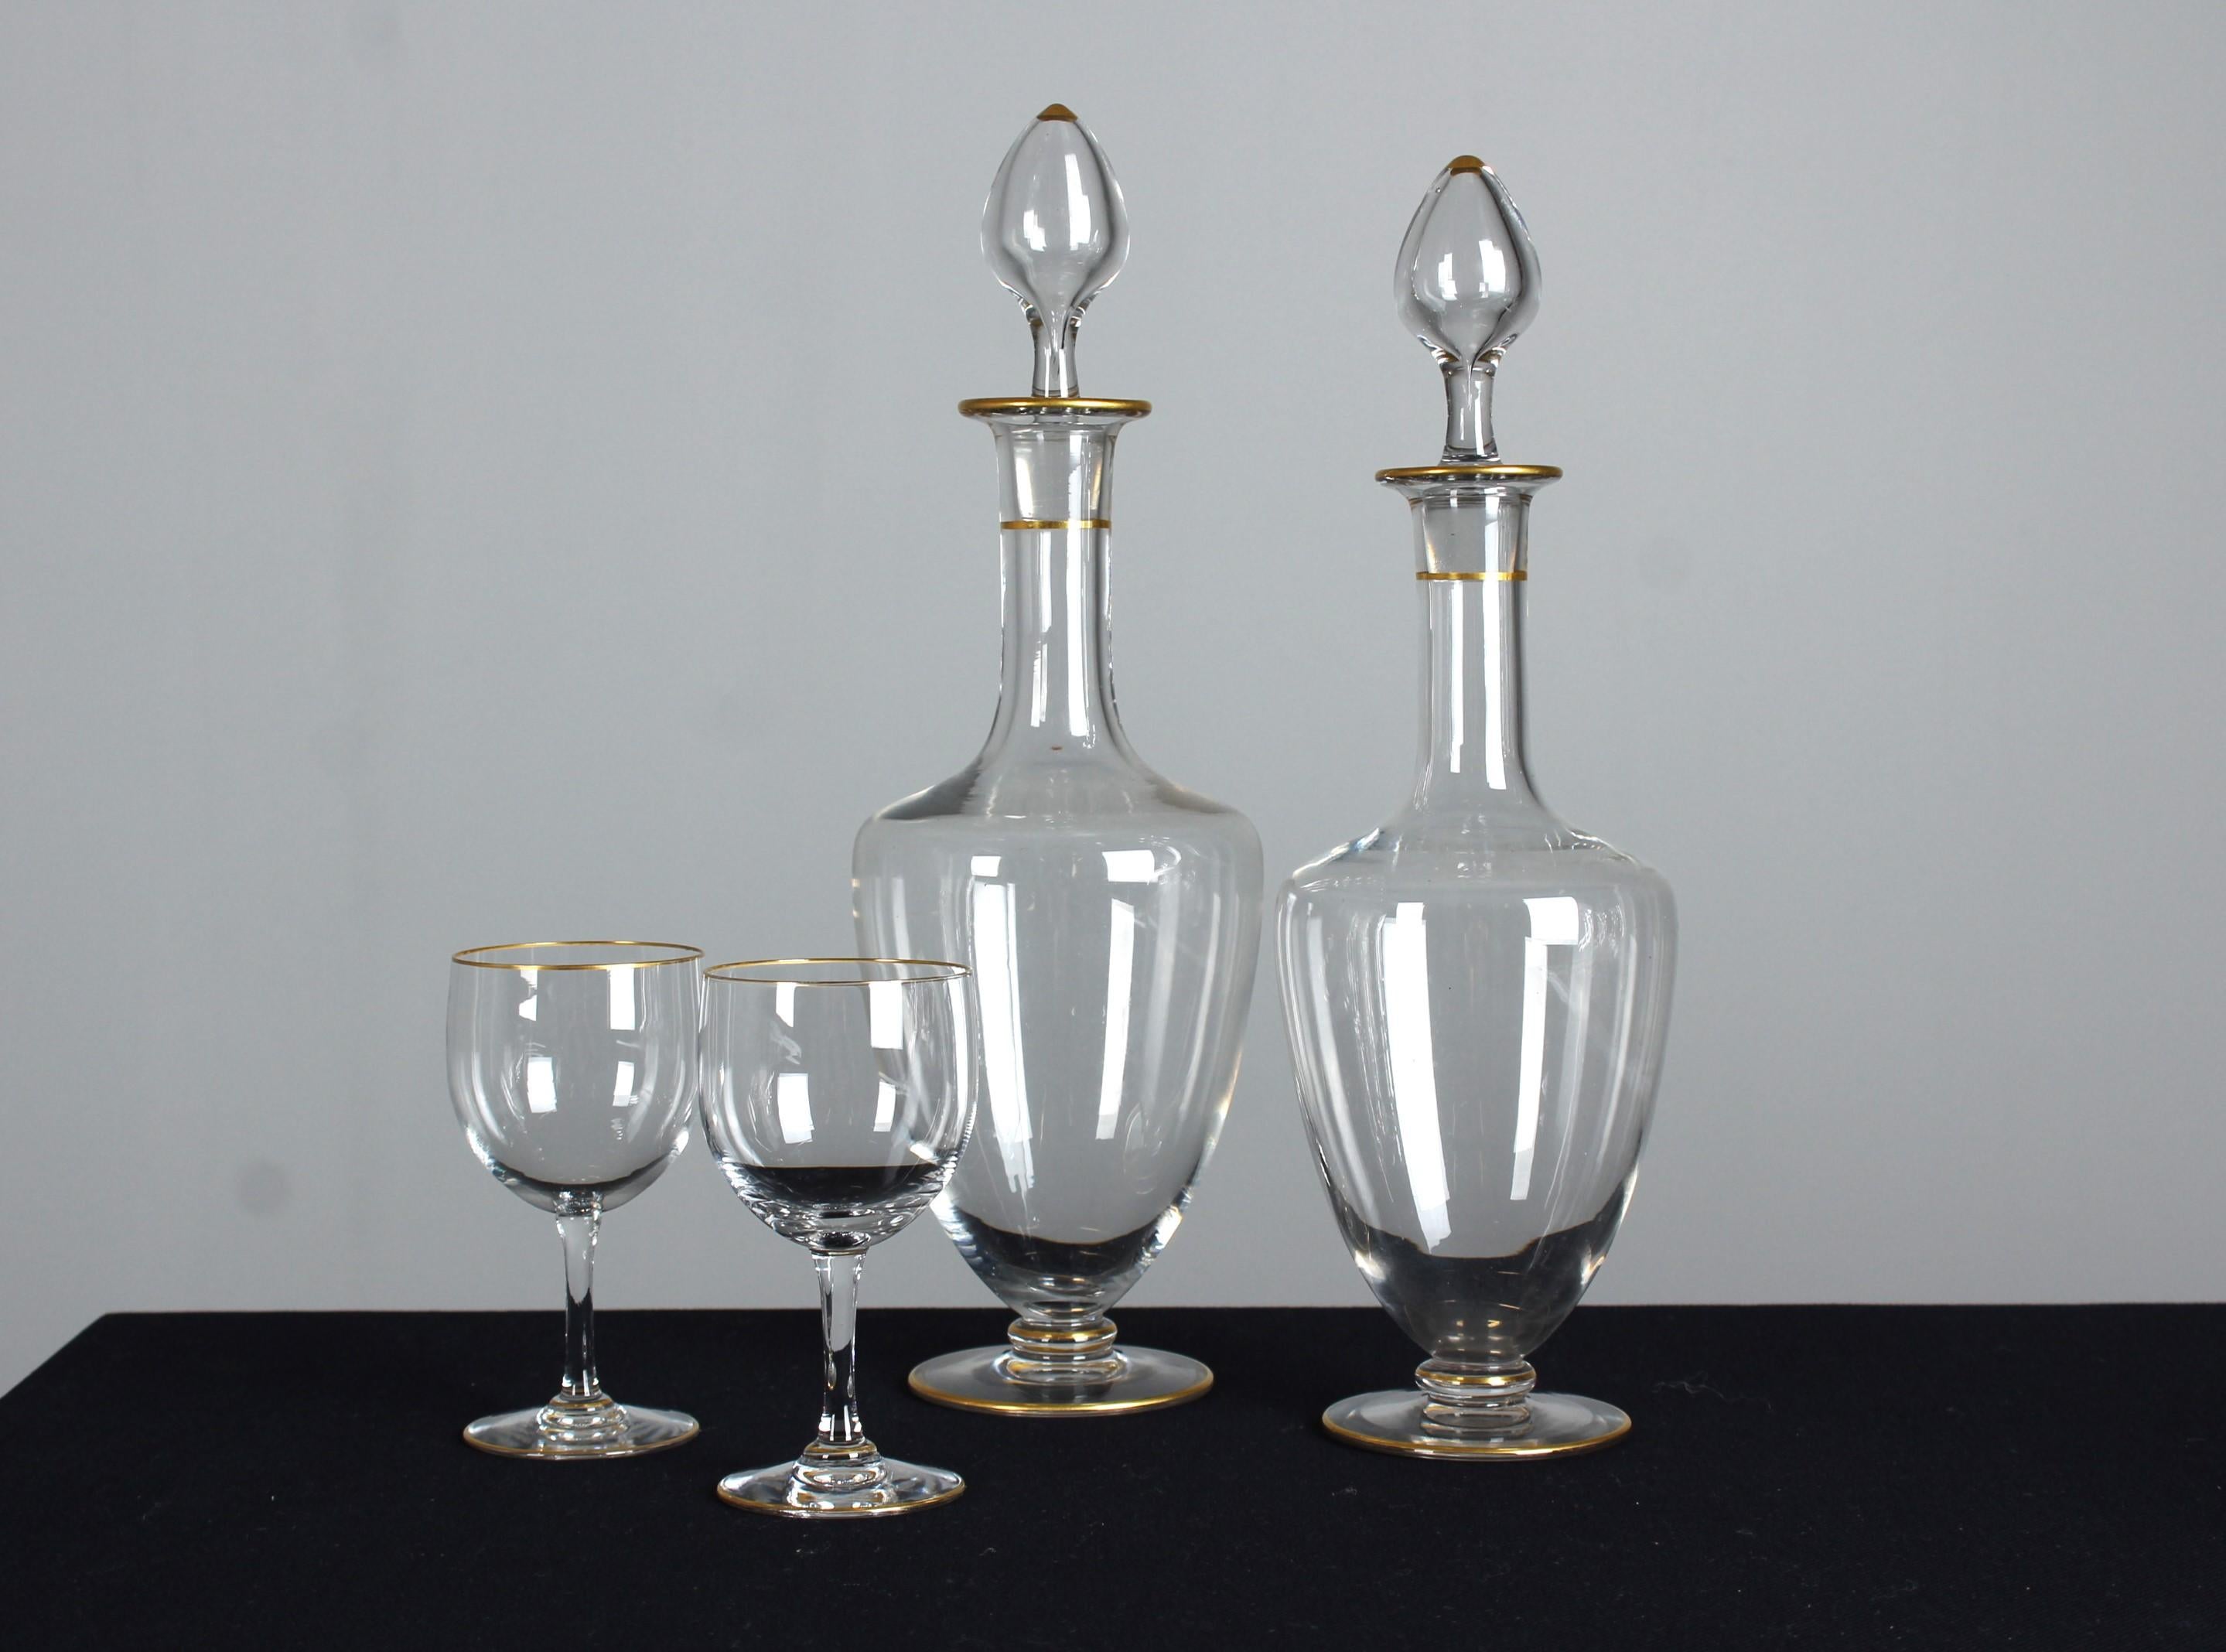 A beautiful and unique set of two antique carafes with two matching aperitif or wine glasses. Elegant golden details.

In France at the beginning of the 20th century, particularly around 1900, carafes experienced a highlight of elegance and